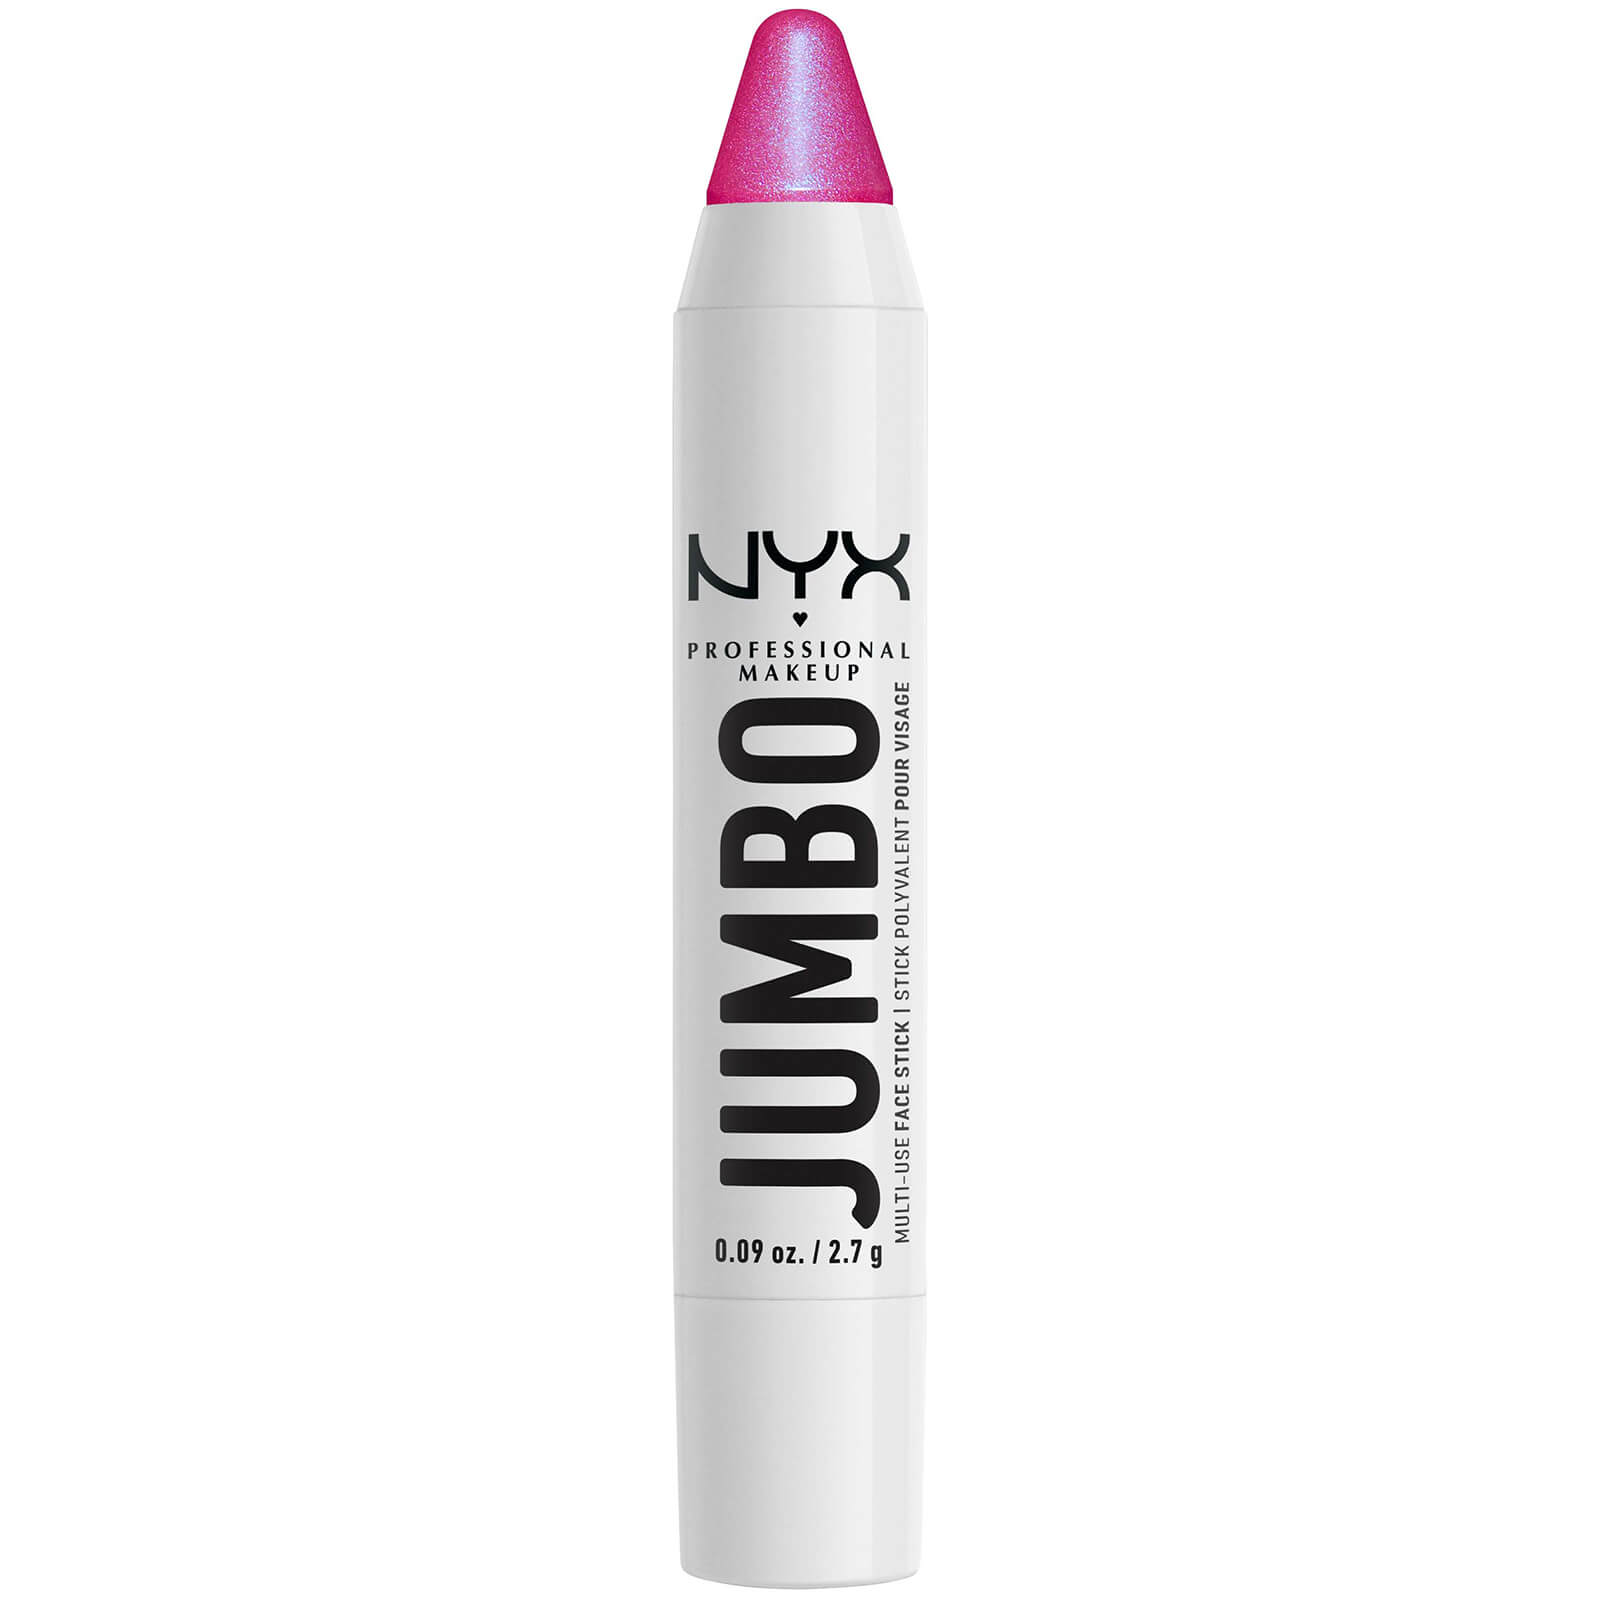 Image of NYX Professional Makeup Jumbo Highlighter Stick 15g (Various Shades) - Blueberry Muffin